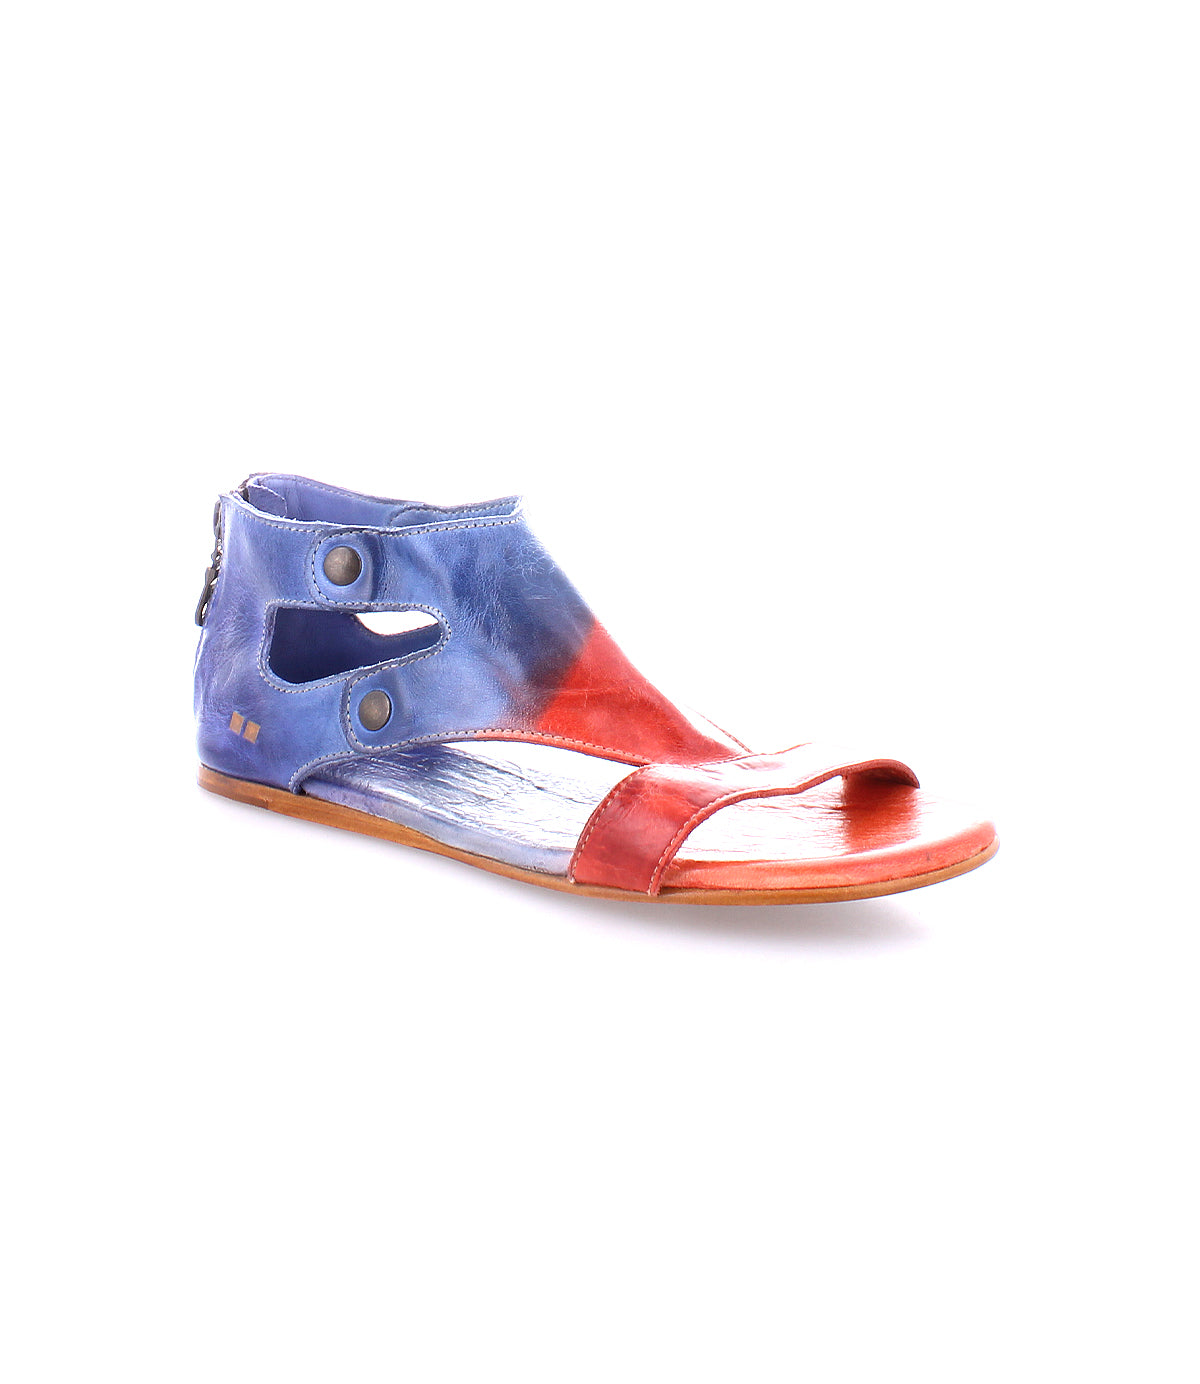 A colorful, red, white, and blue Bed Stu leather sandal with a peep toe design and ankle strap, isolated on a white background.